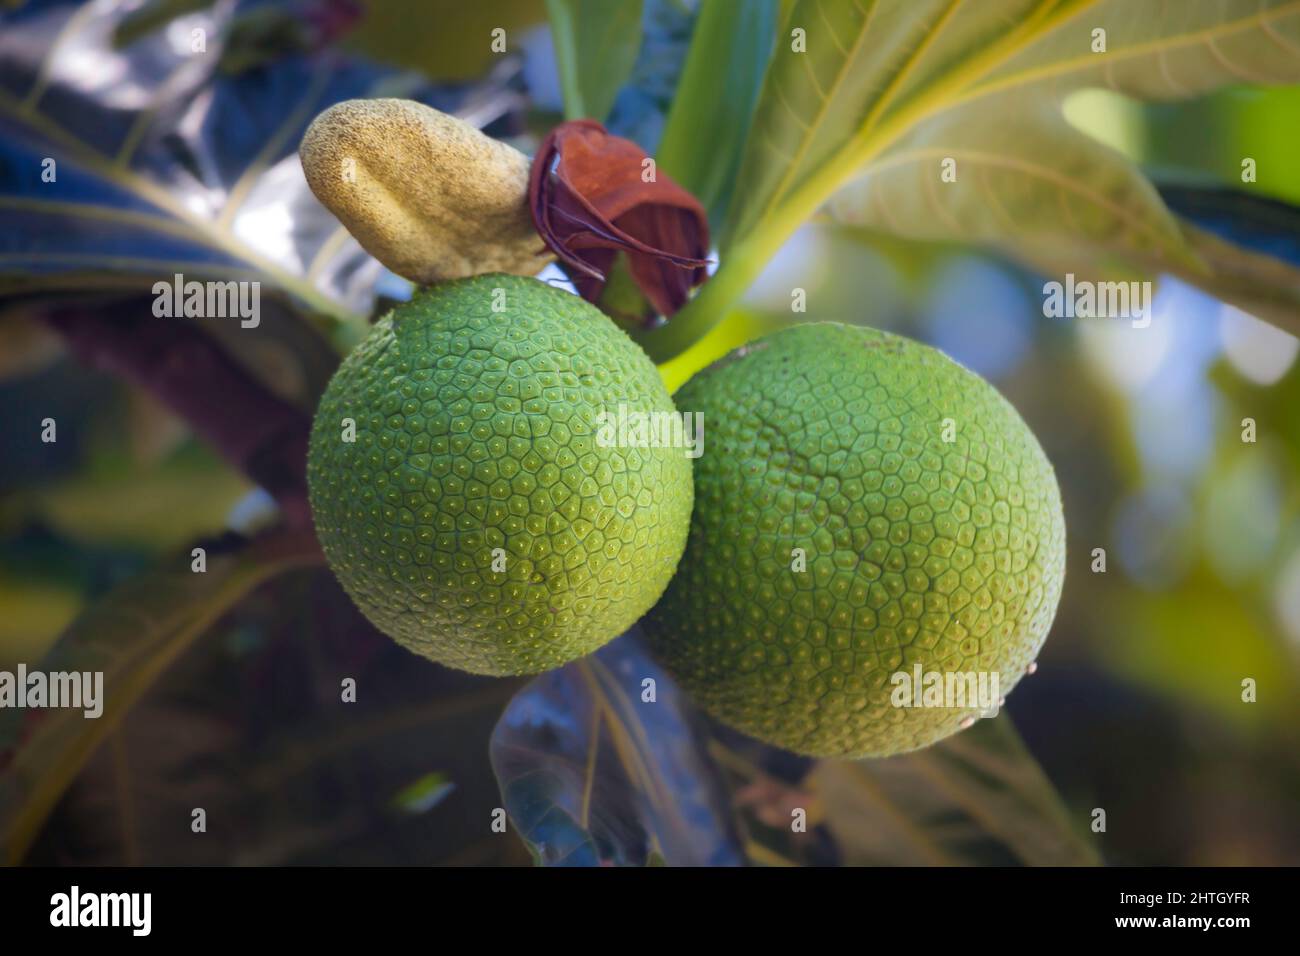 Breadfruit tree, Artocarpus altilis, with plump green fruit and it's distinctive leaves. This plant is sacred to the native Hawaiian culture and known Stock Photo